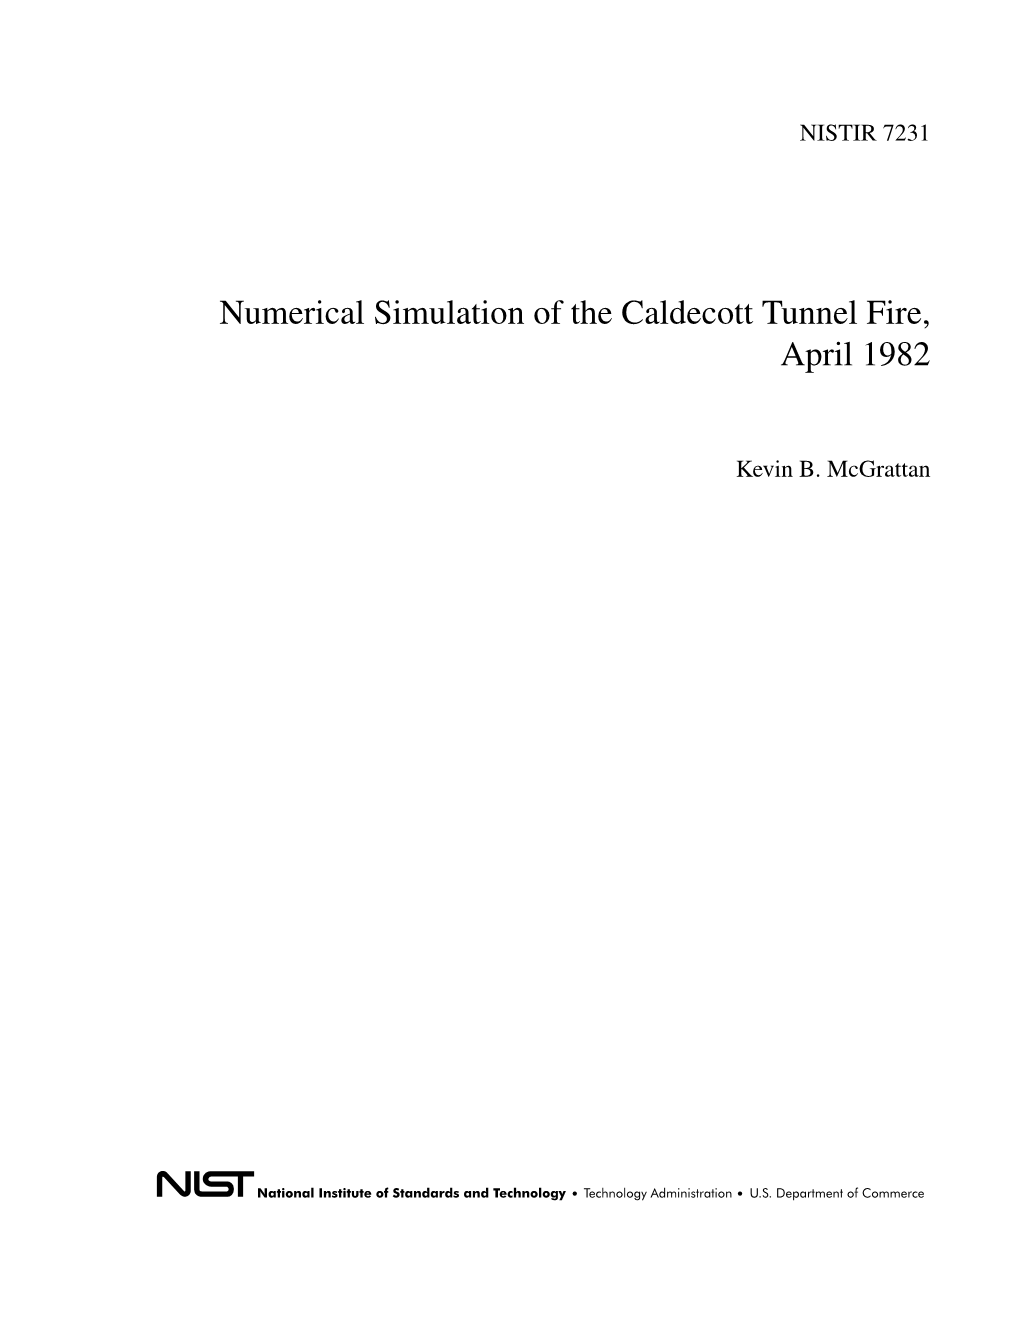 Numerical Simulation of the Caldecott Tunnel Fire, April 1982